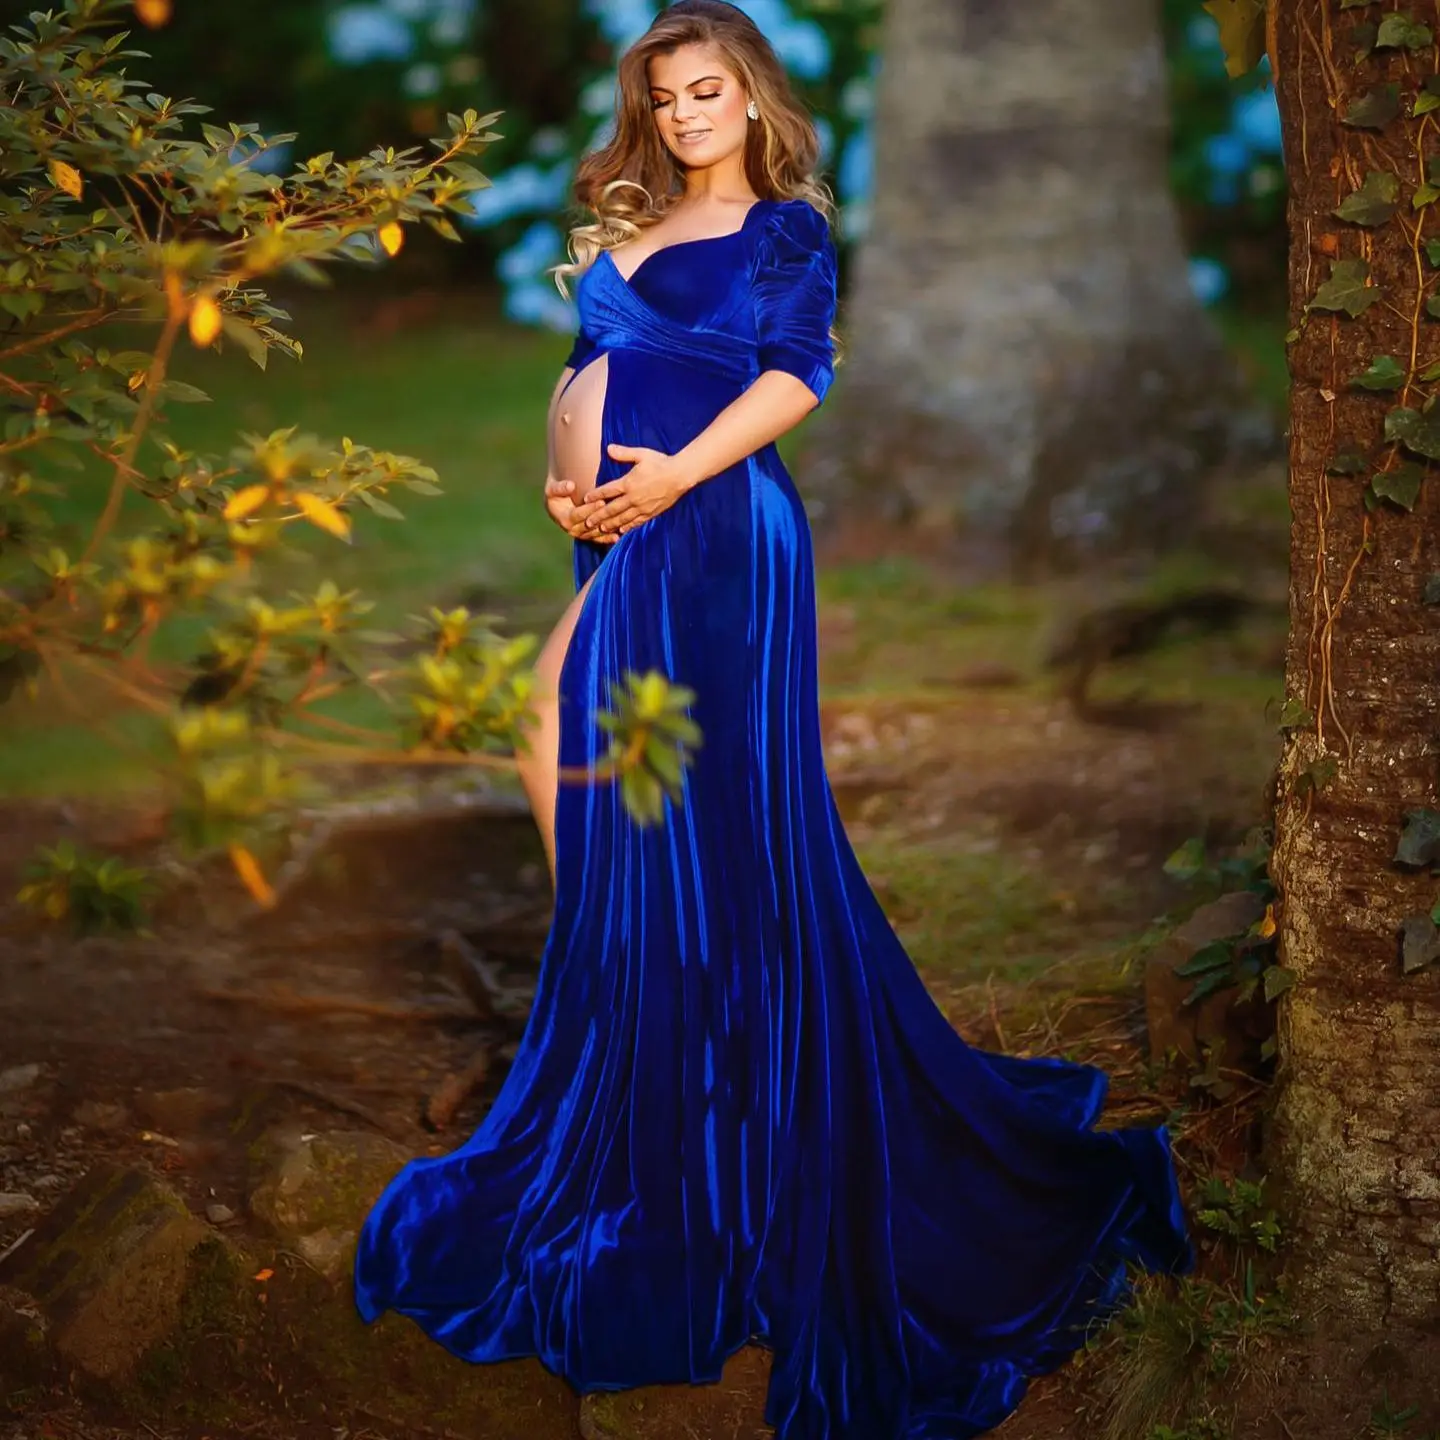 

Royal Blue Velour Maternity Photoshoot Dresses Women A Line Front Slit Prom Dress Ladies Baby Shower Gown